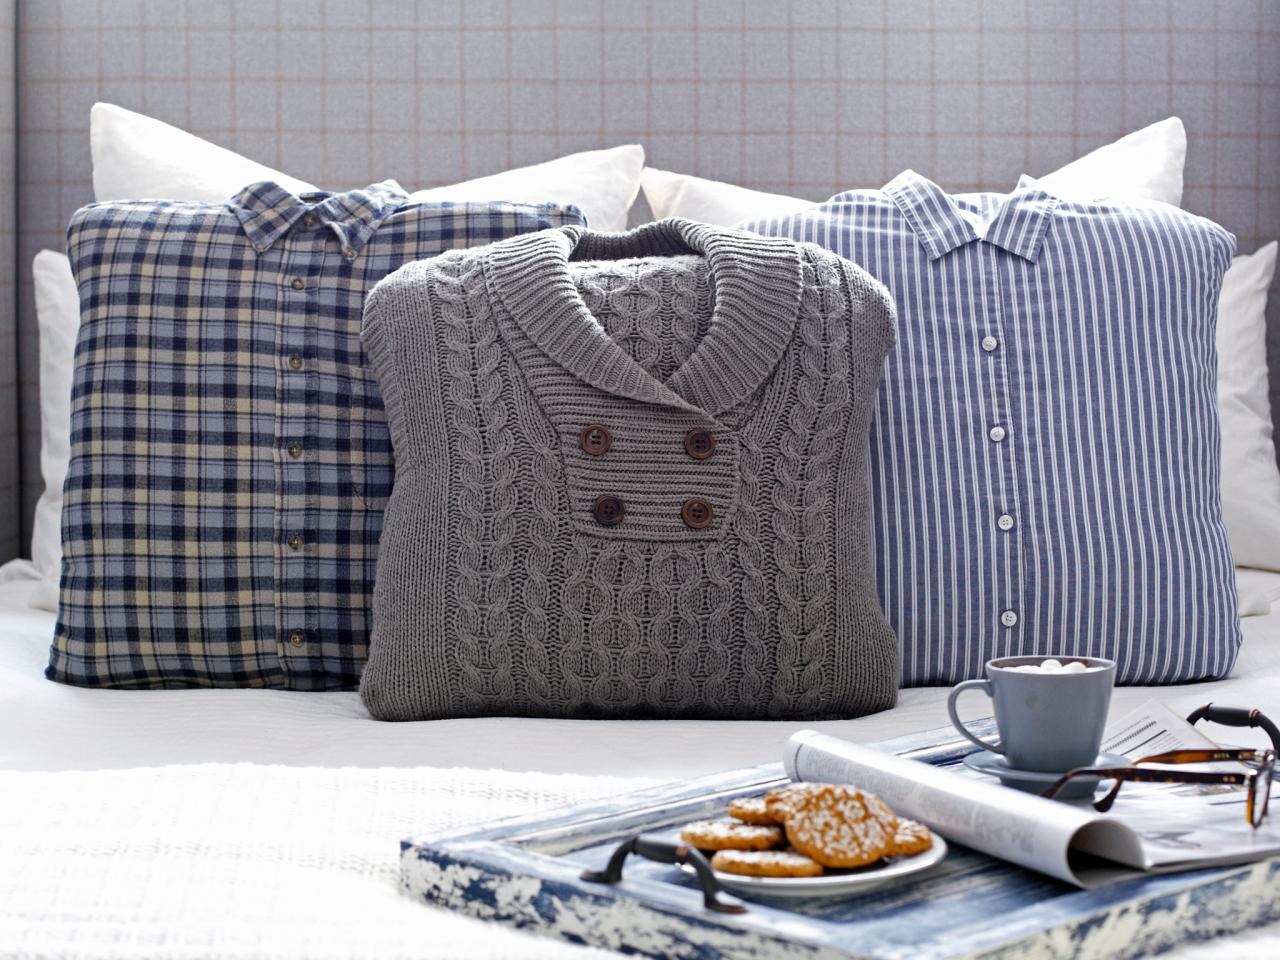 Old Sweater Into a Chic, Preppy Pillow 